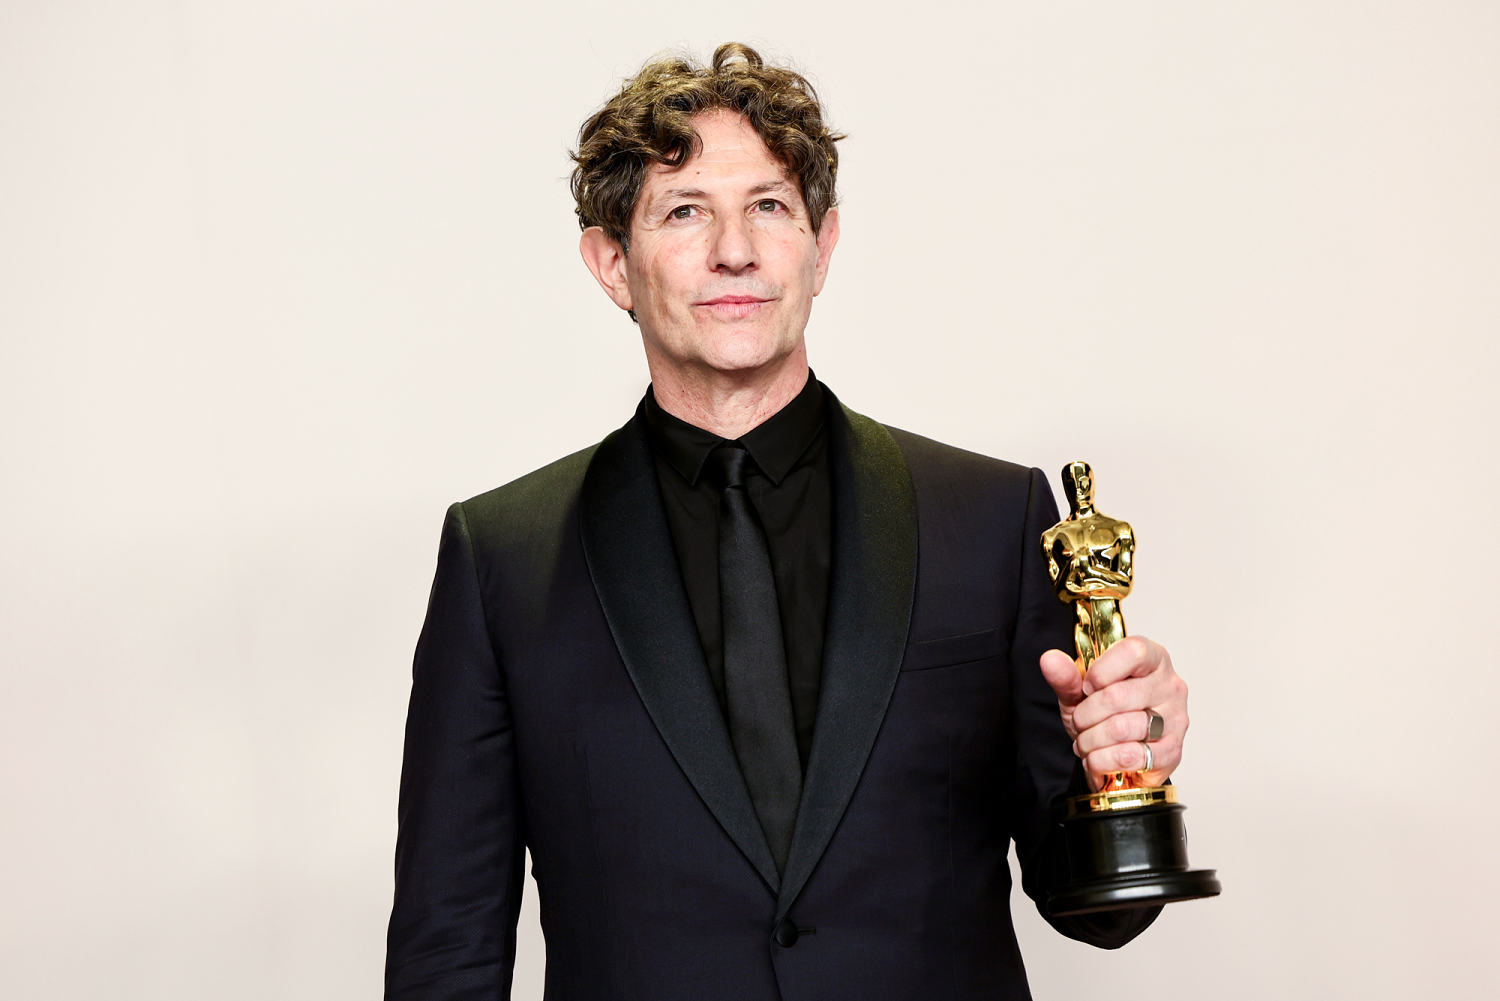 Jonathan Glazer condemns violence in Gaza and Israel in Oscars speech